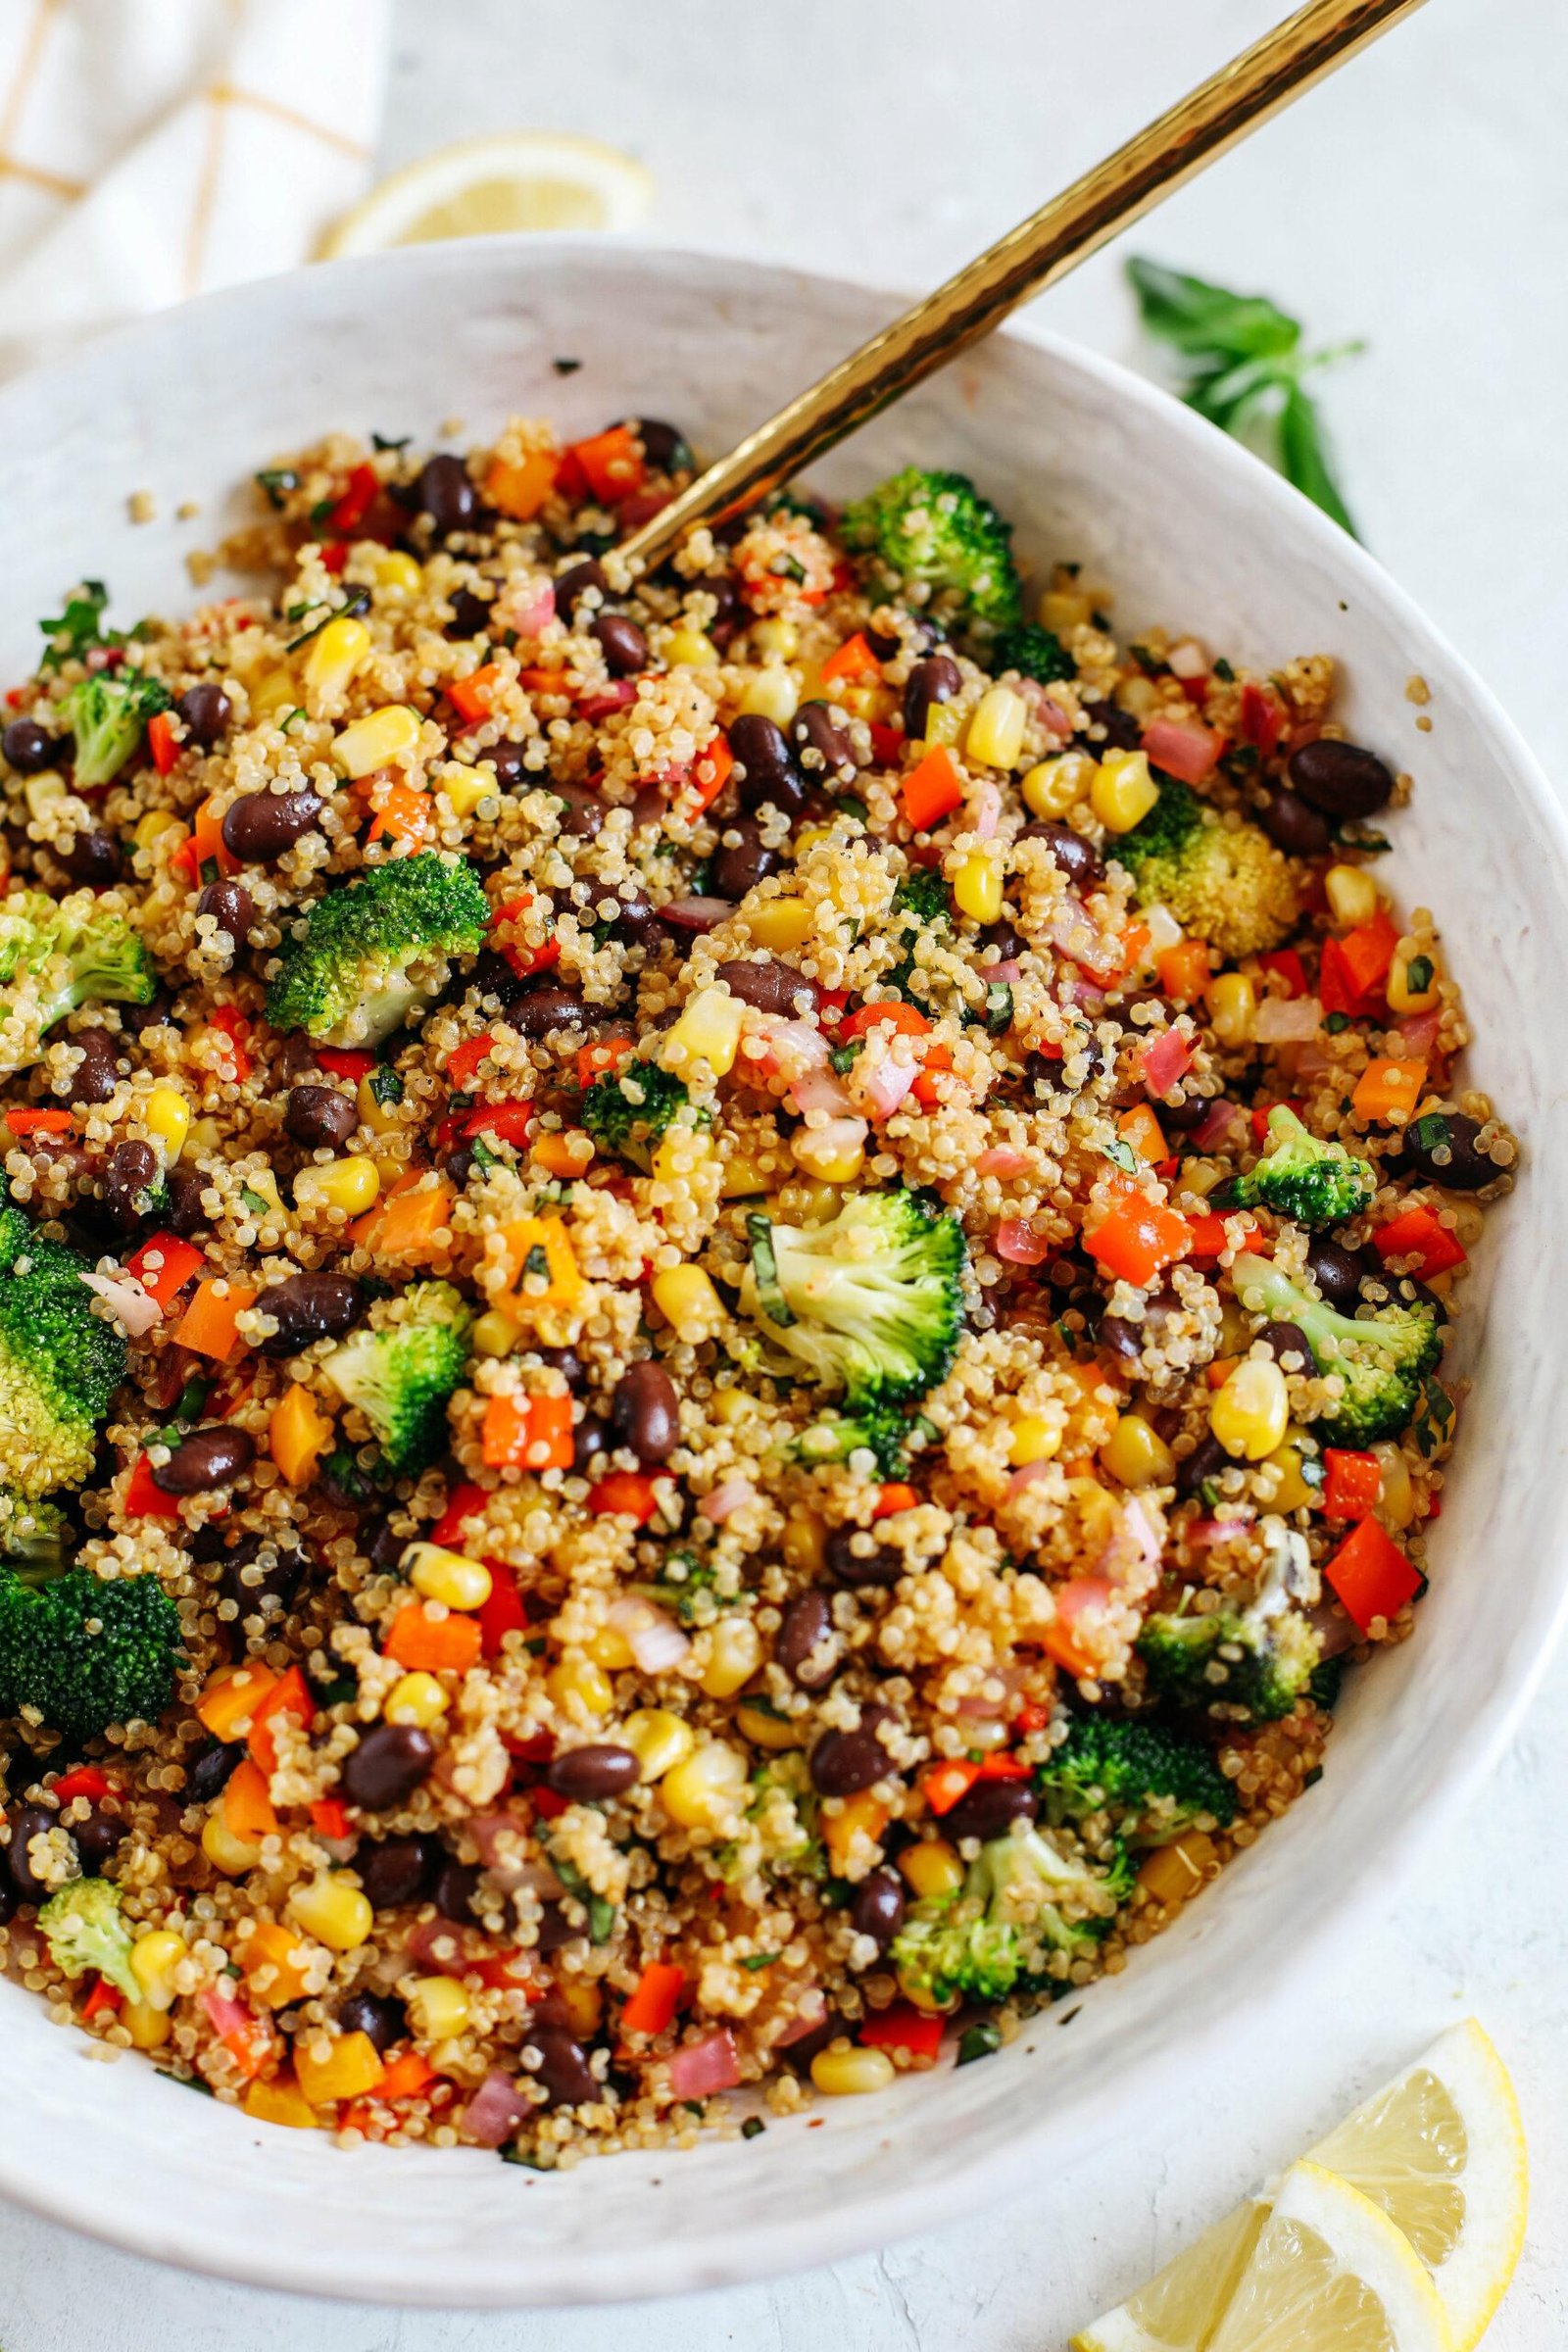 Deliciously Simple and Healthy Quinoa Salad Recipe for Summer